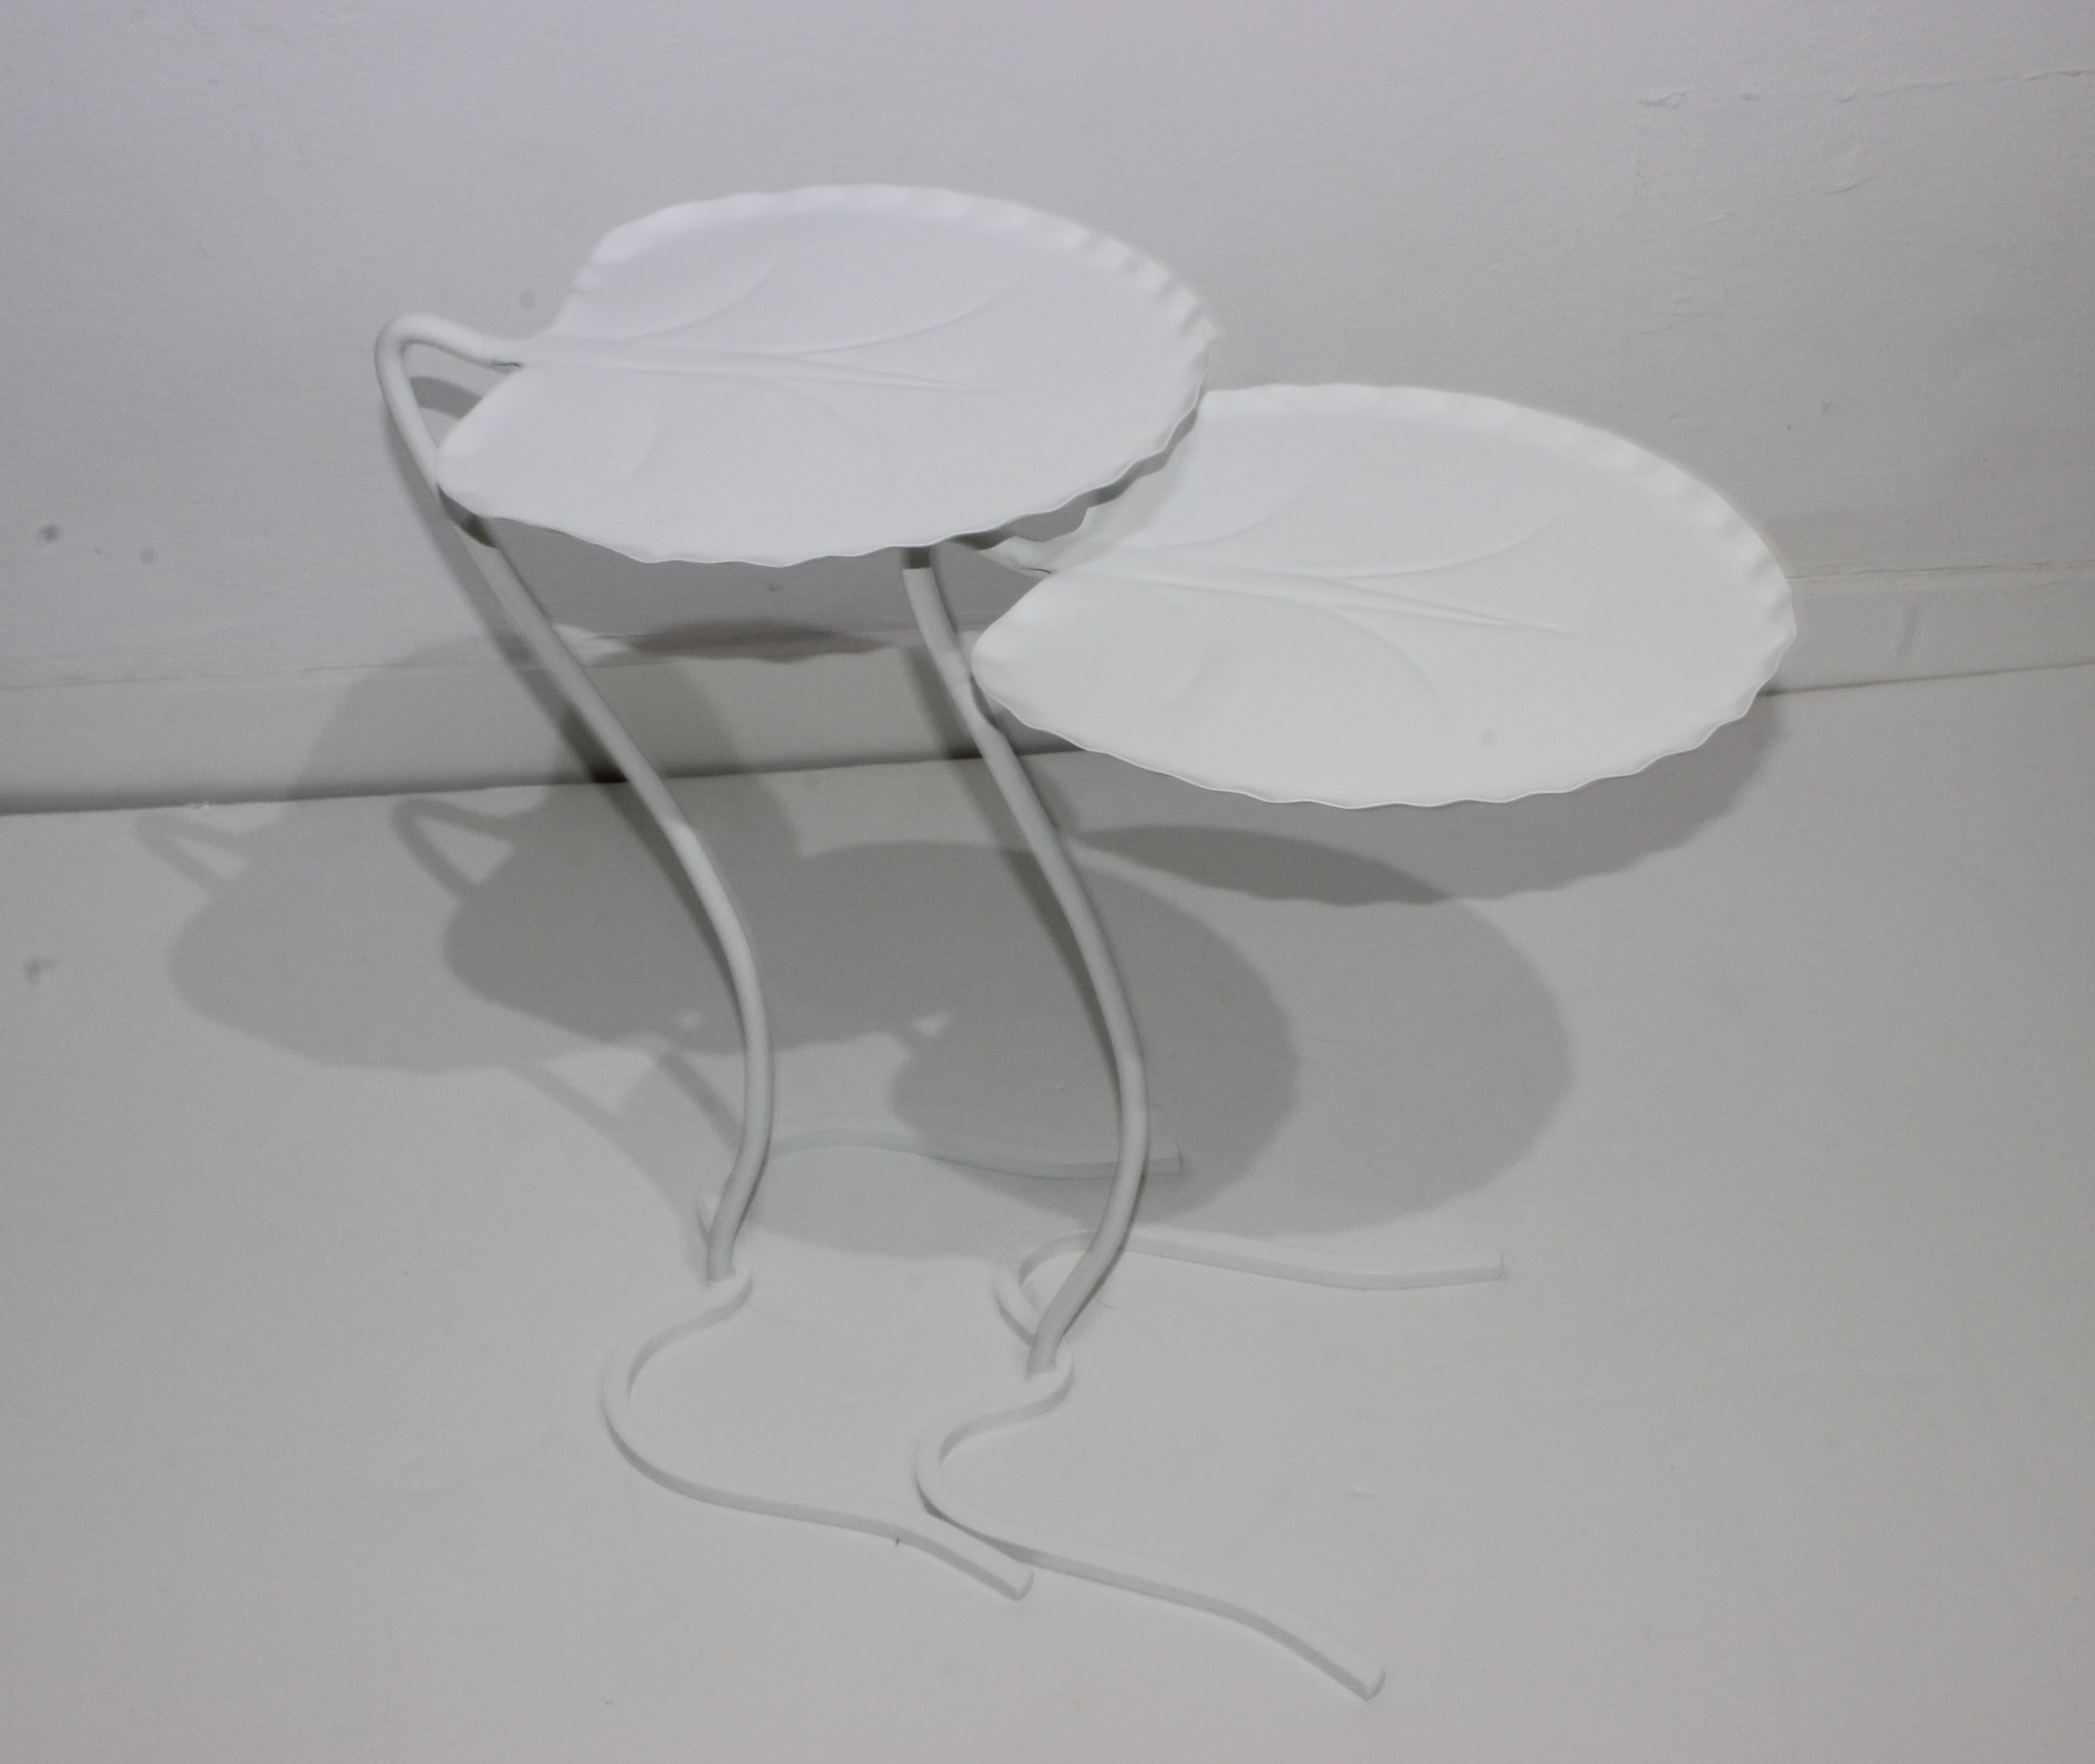 Salterini Lily pad nesting tables midcentury fresh painted white - the pair Froma Palm Beach estate.

Size of the taller: 22 3/4